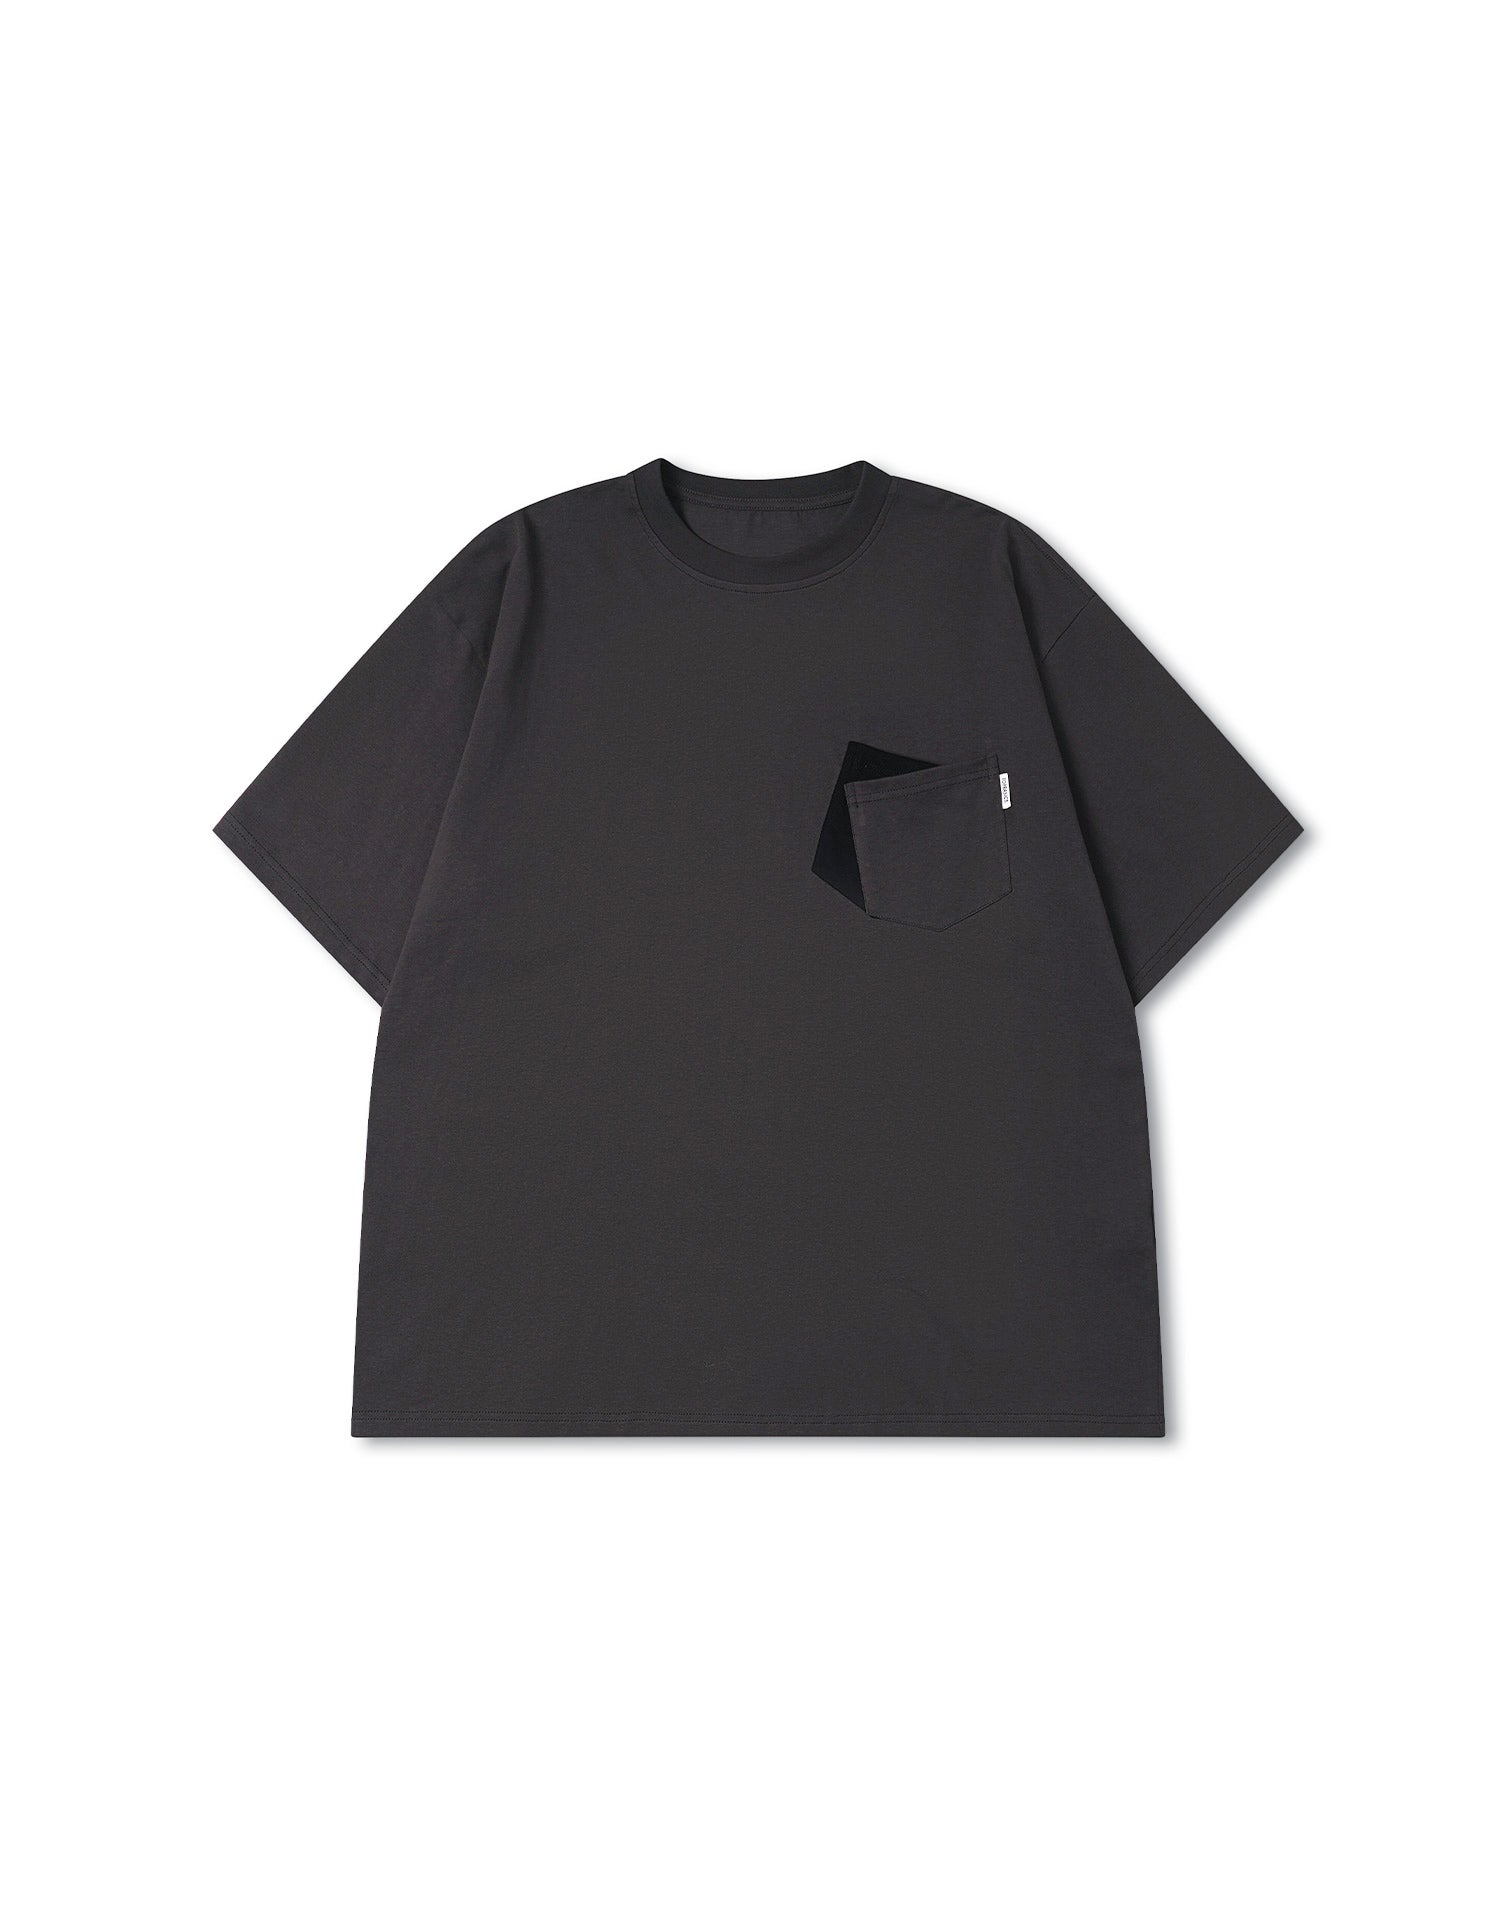 TopBasics Two Patch Pockets T-Shirt